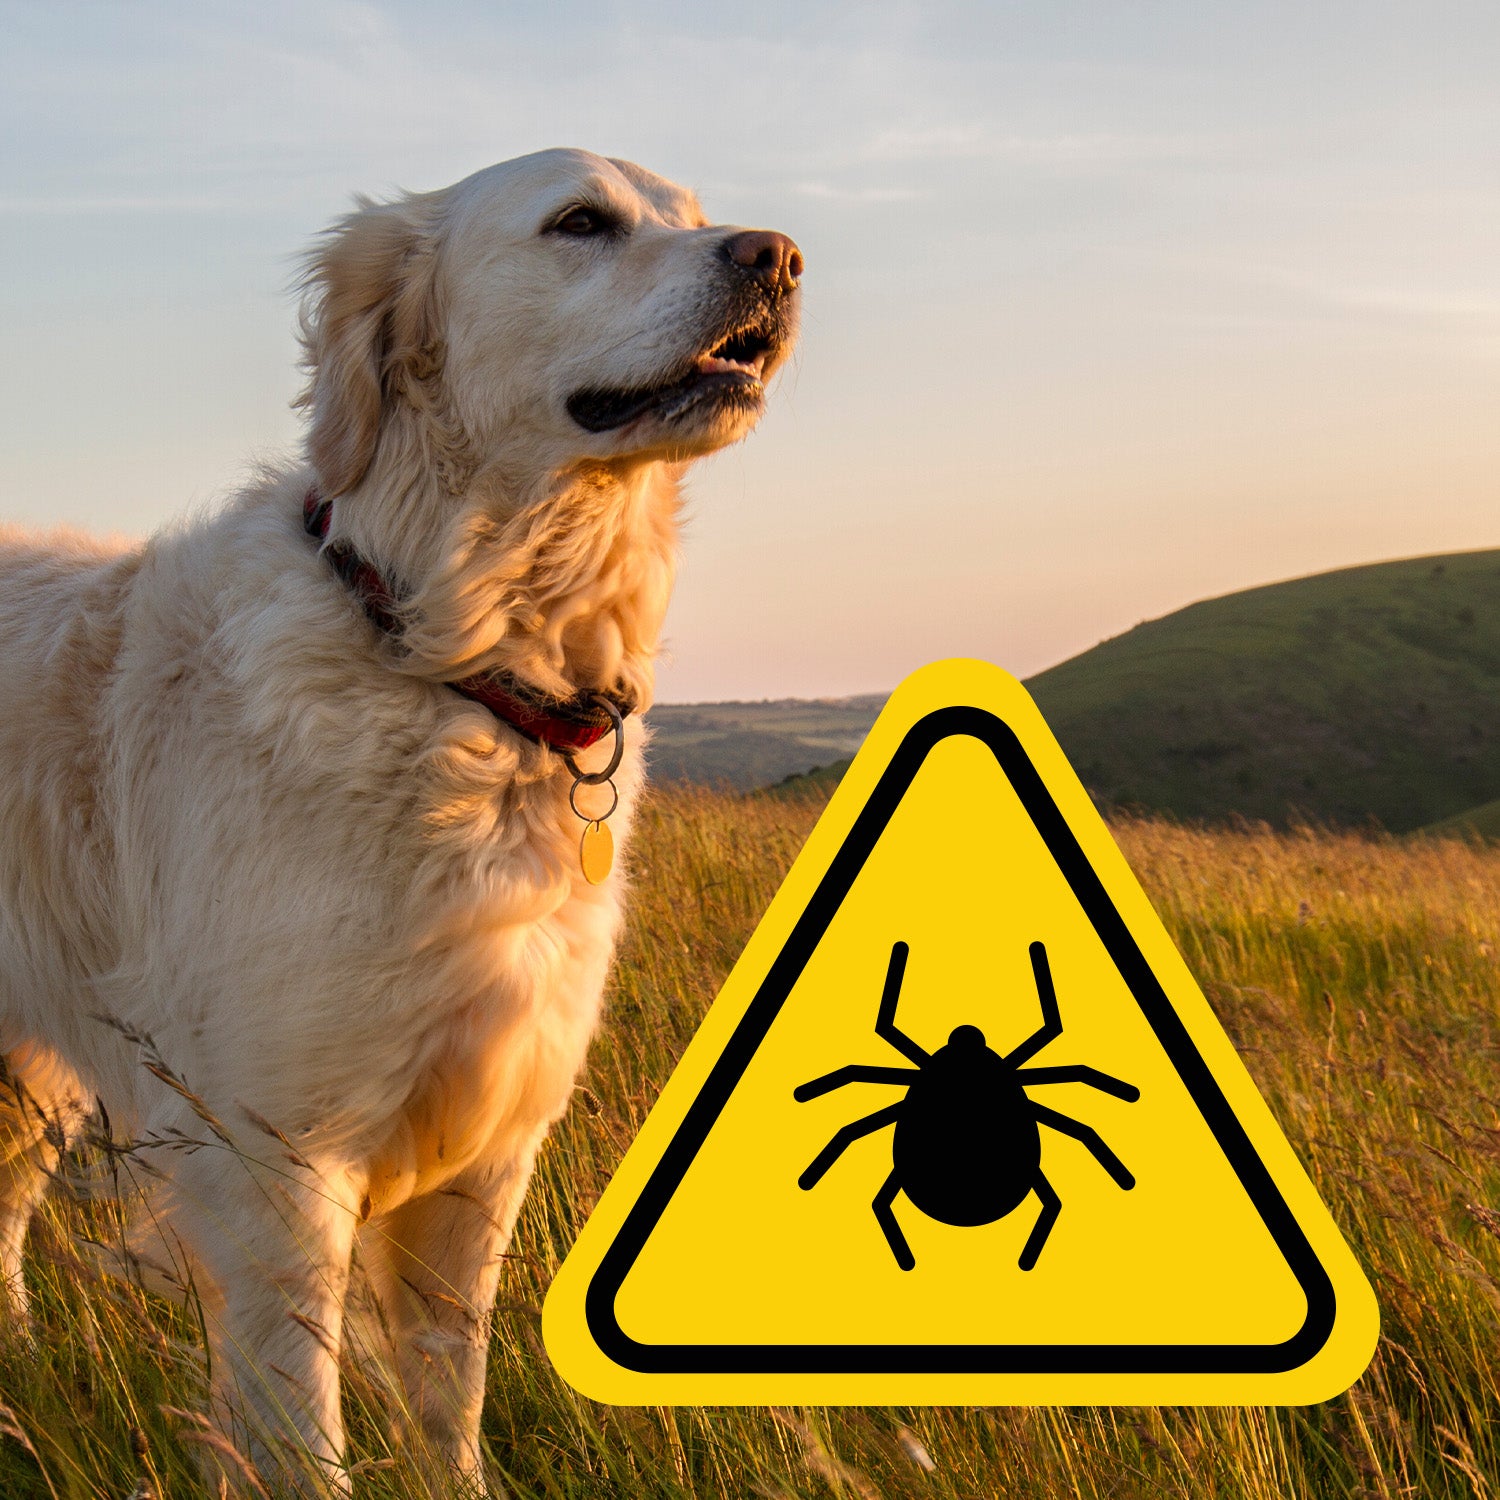 What Are the Best Natural Remedies for Flea and Tick Prevention?